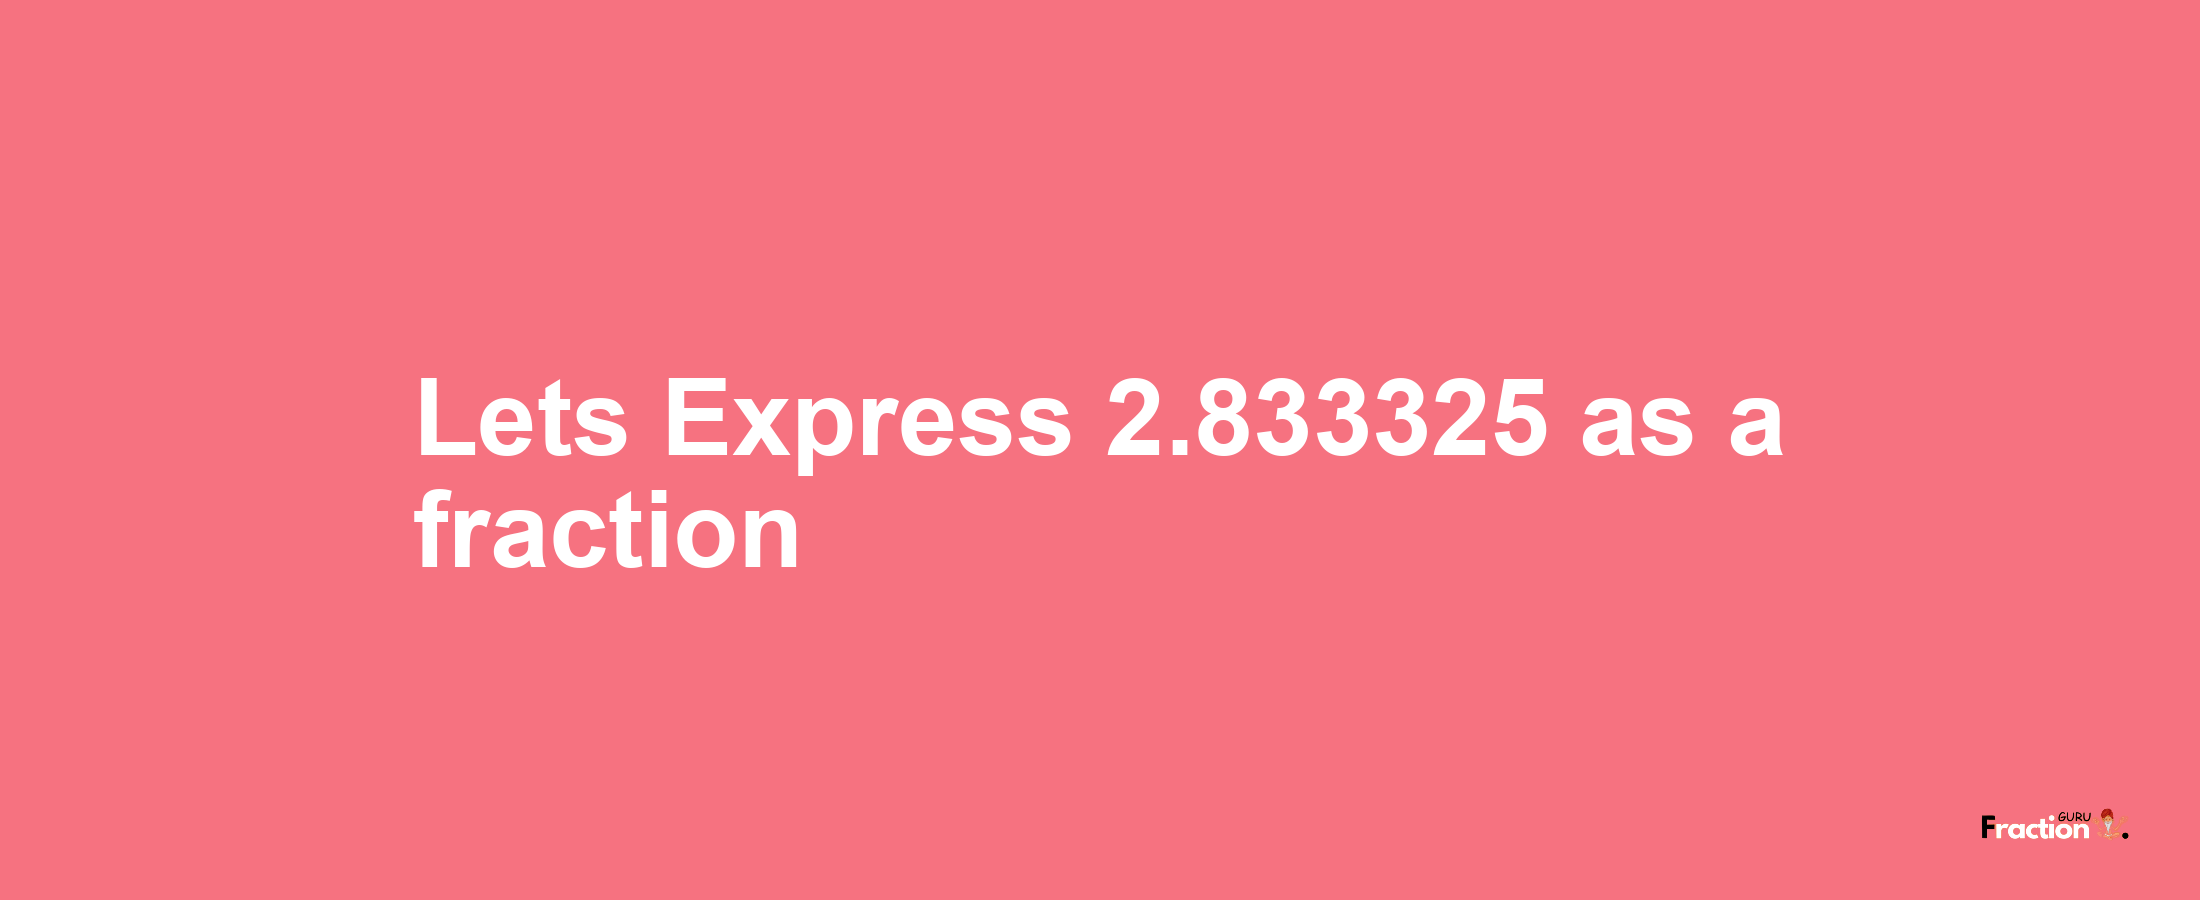 Lets Express 2.833325 as afraction